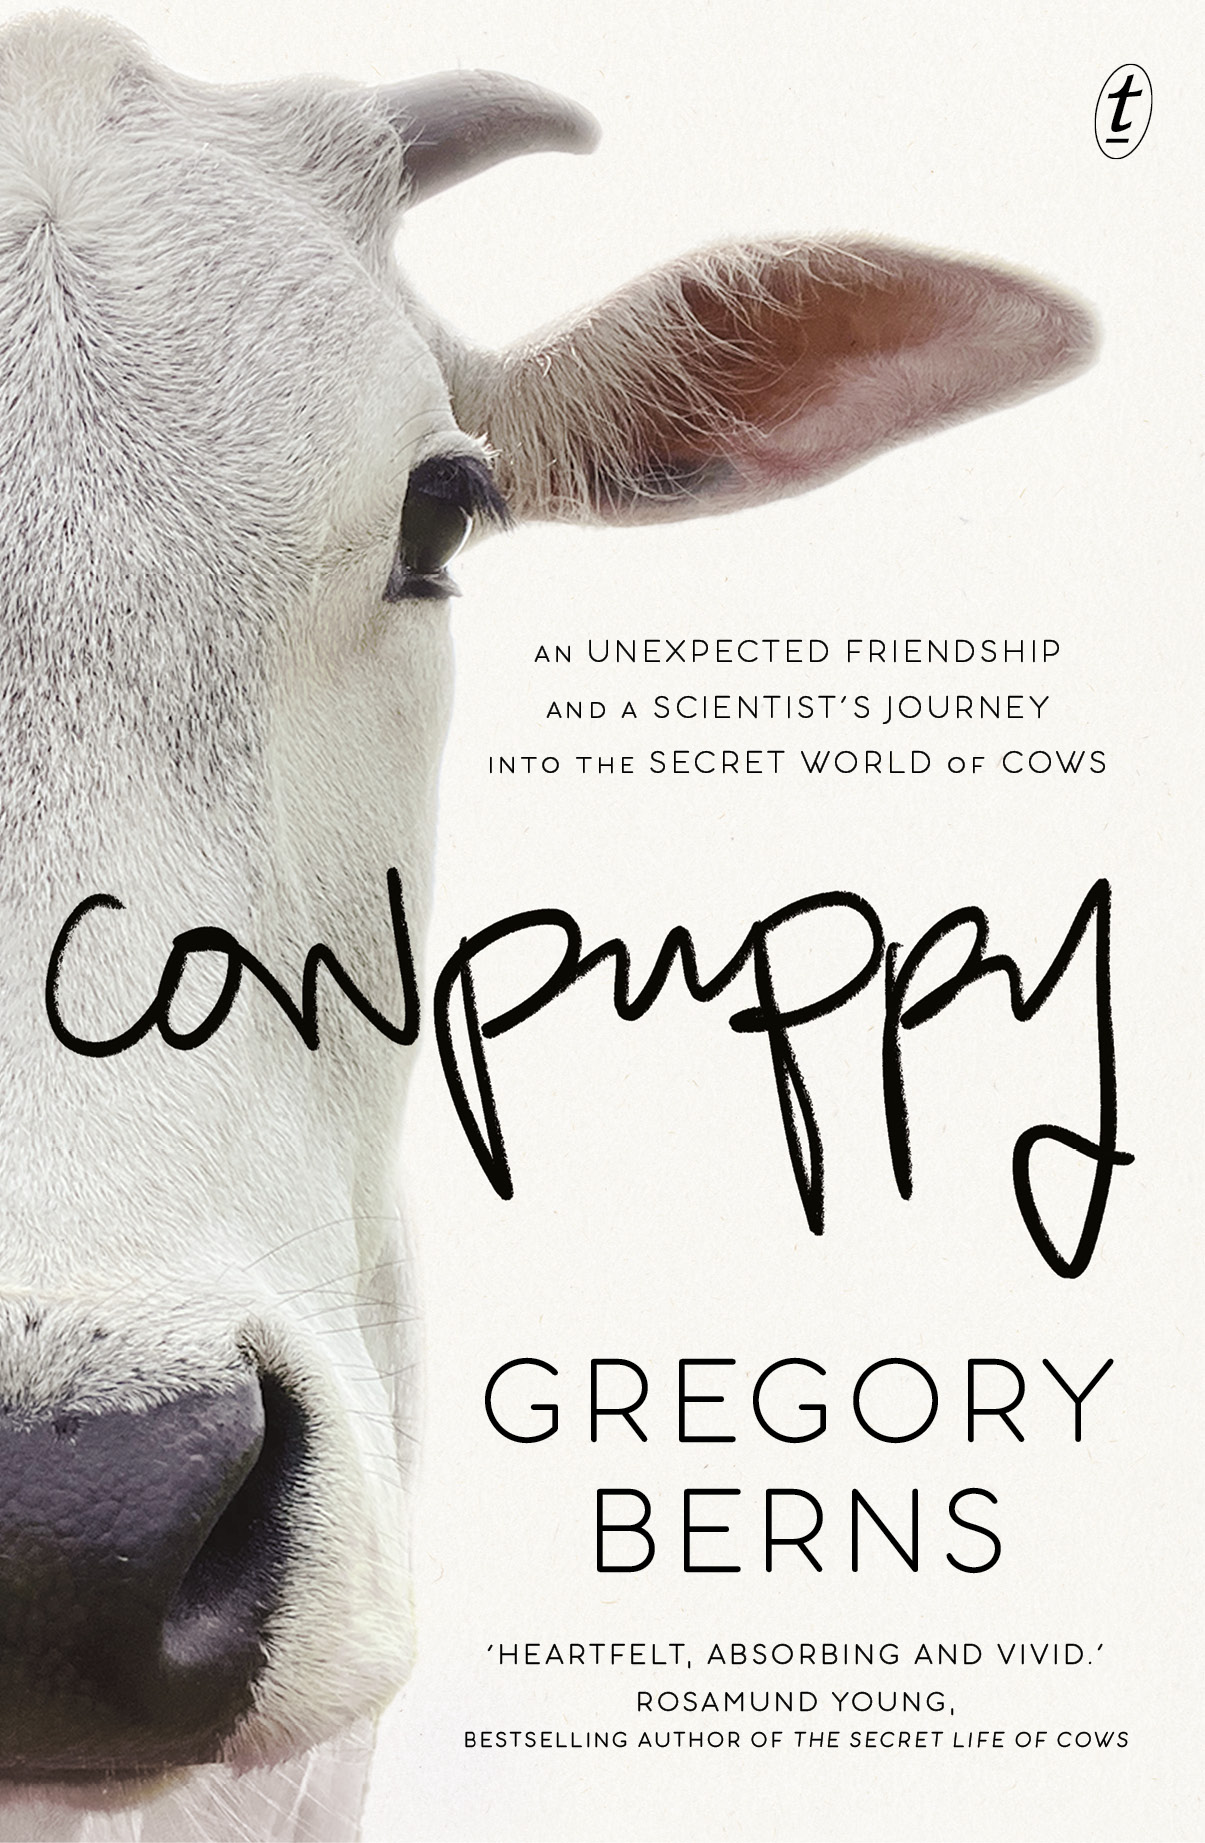 Cowpuppy by Gregory Berns